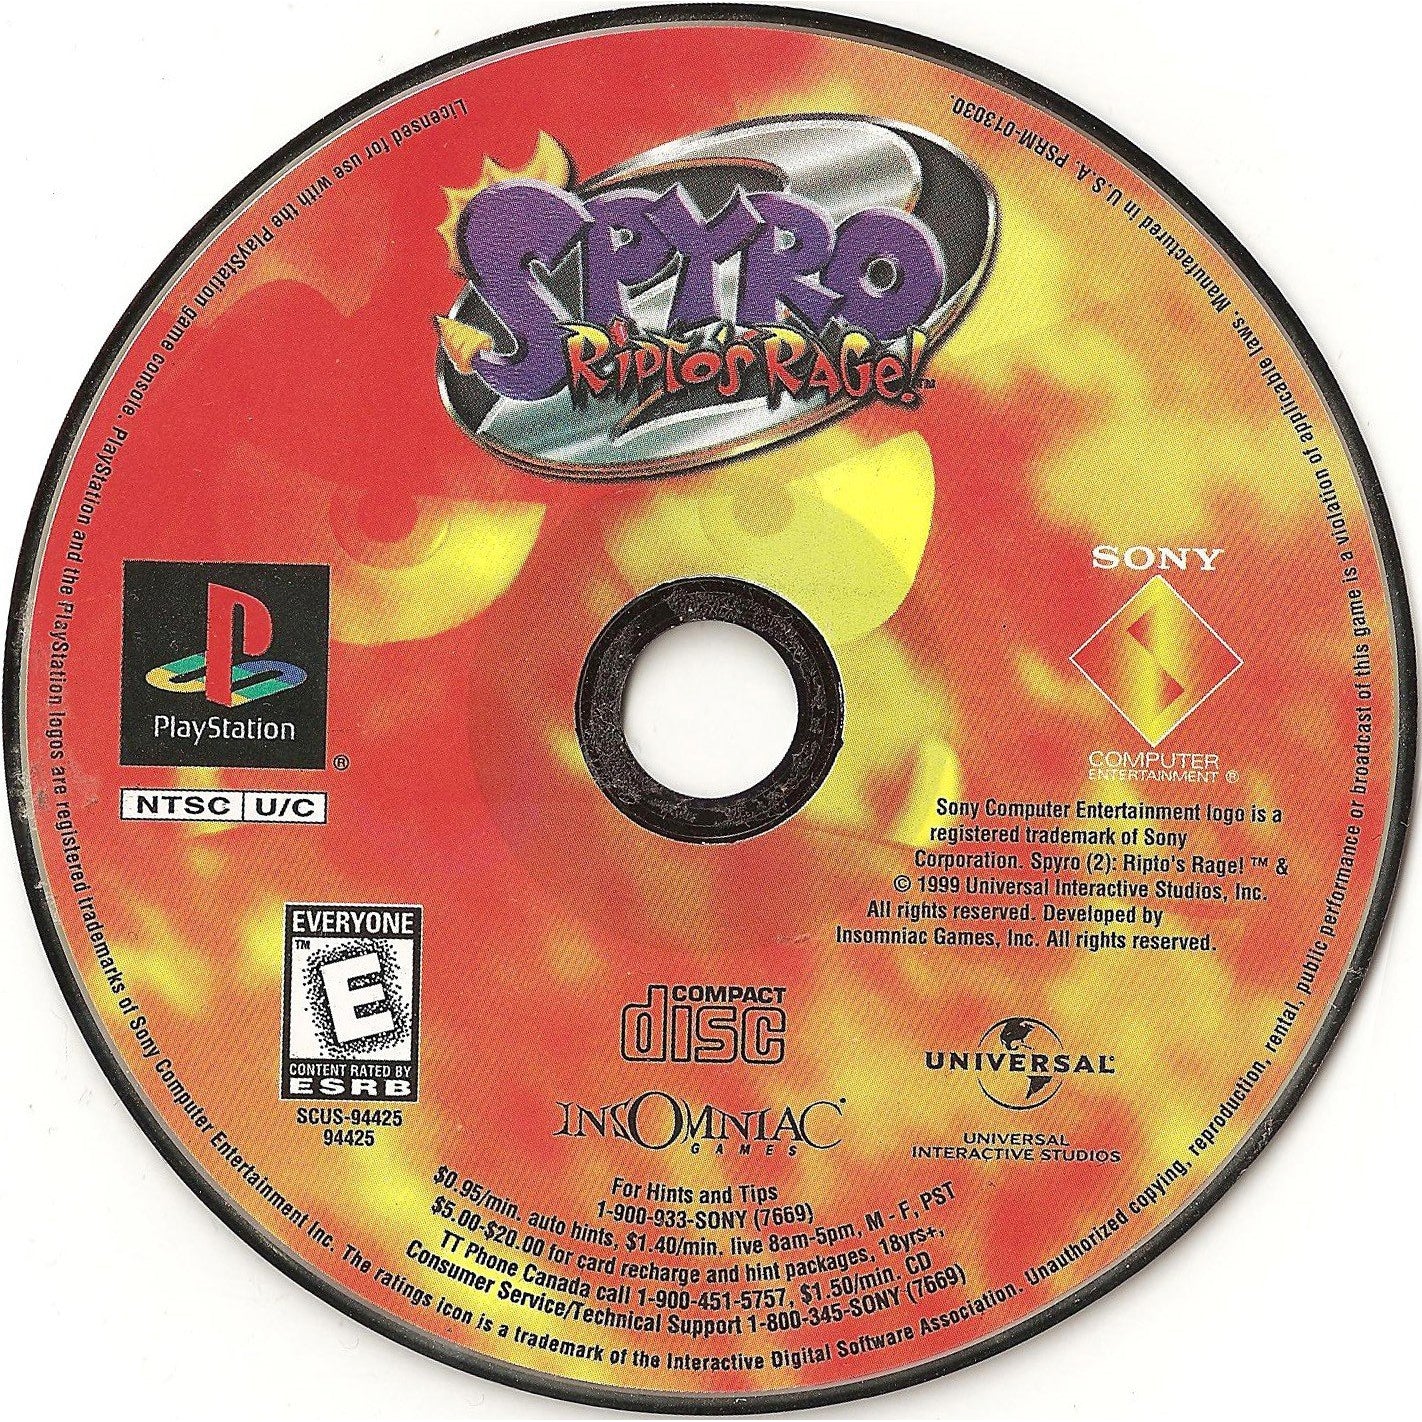 Spyro 2: Ripto's Rage! - PlayStation 1 (PS1) Game Complete - YourGamingShop.com - Buy, Sell, Trade Video Games Online. 120 Day Warranty. Satisfaction Guaranteed.